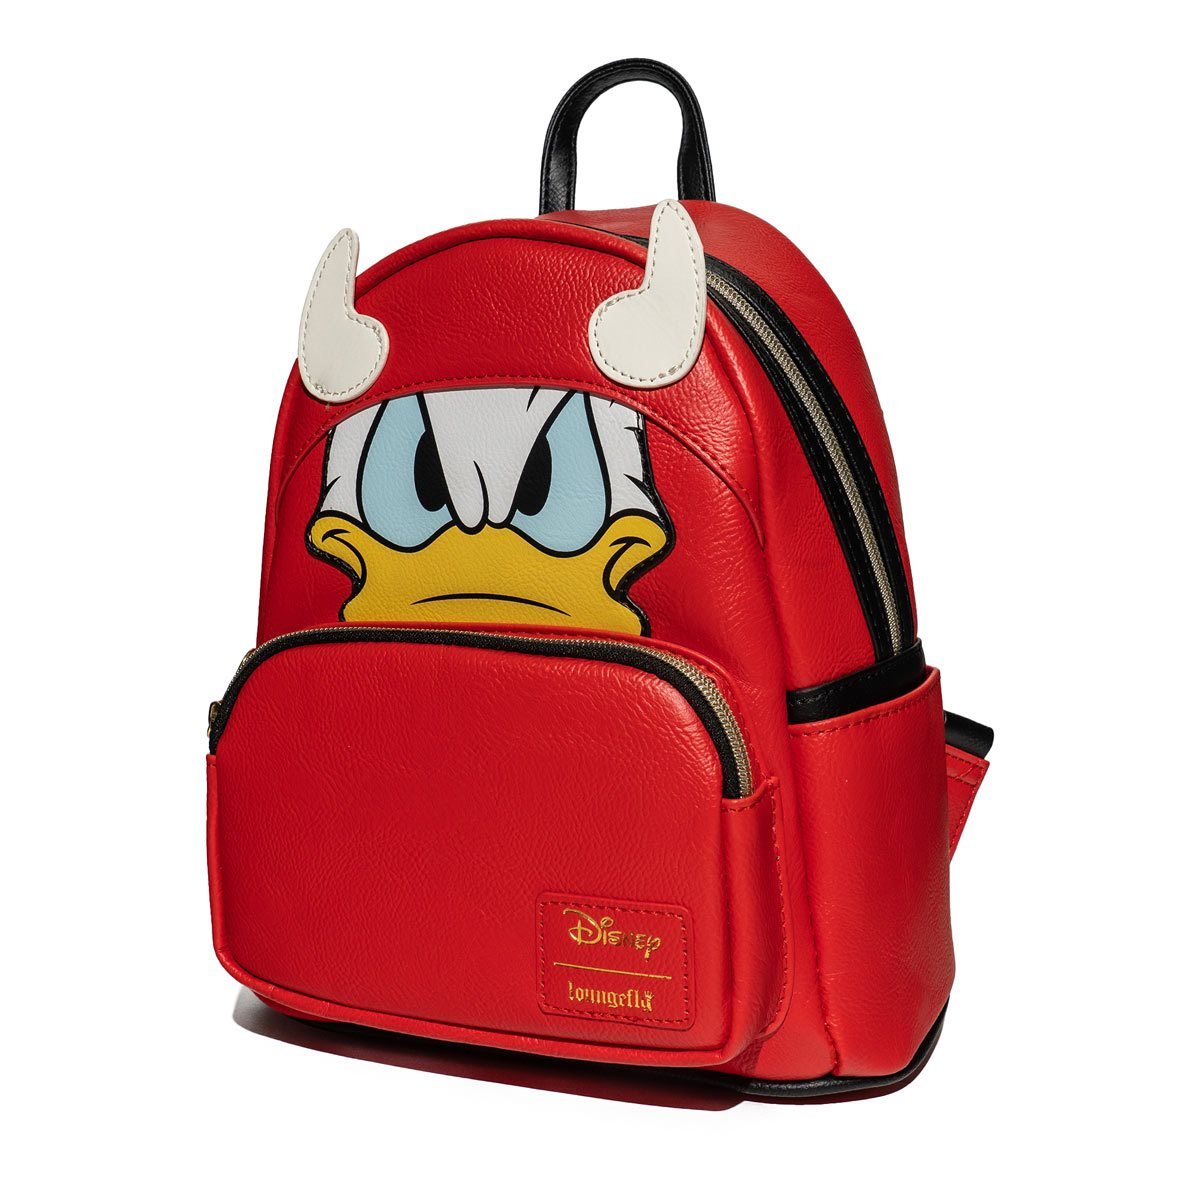 Loungefly Disney Donald Duck Devil Donald Cosplay Mini Backpack - Entertainment Earth Ex - Side View